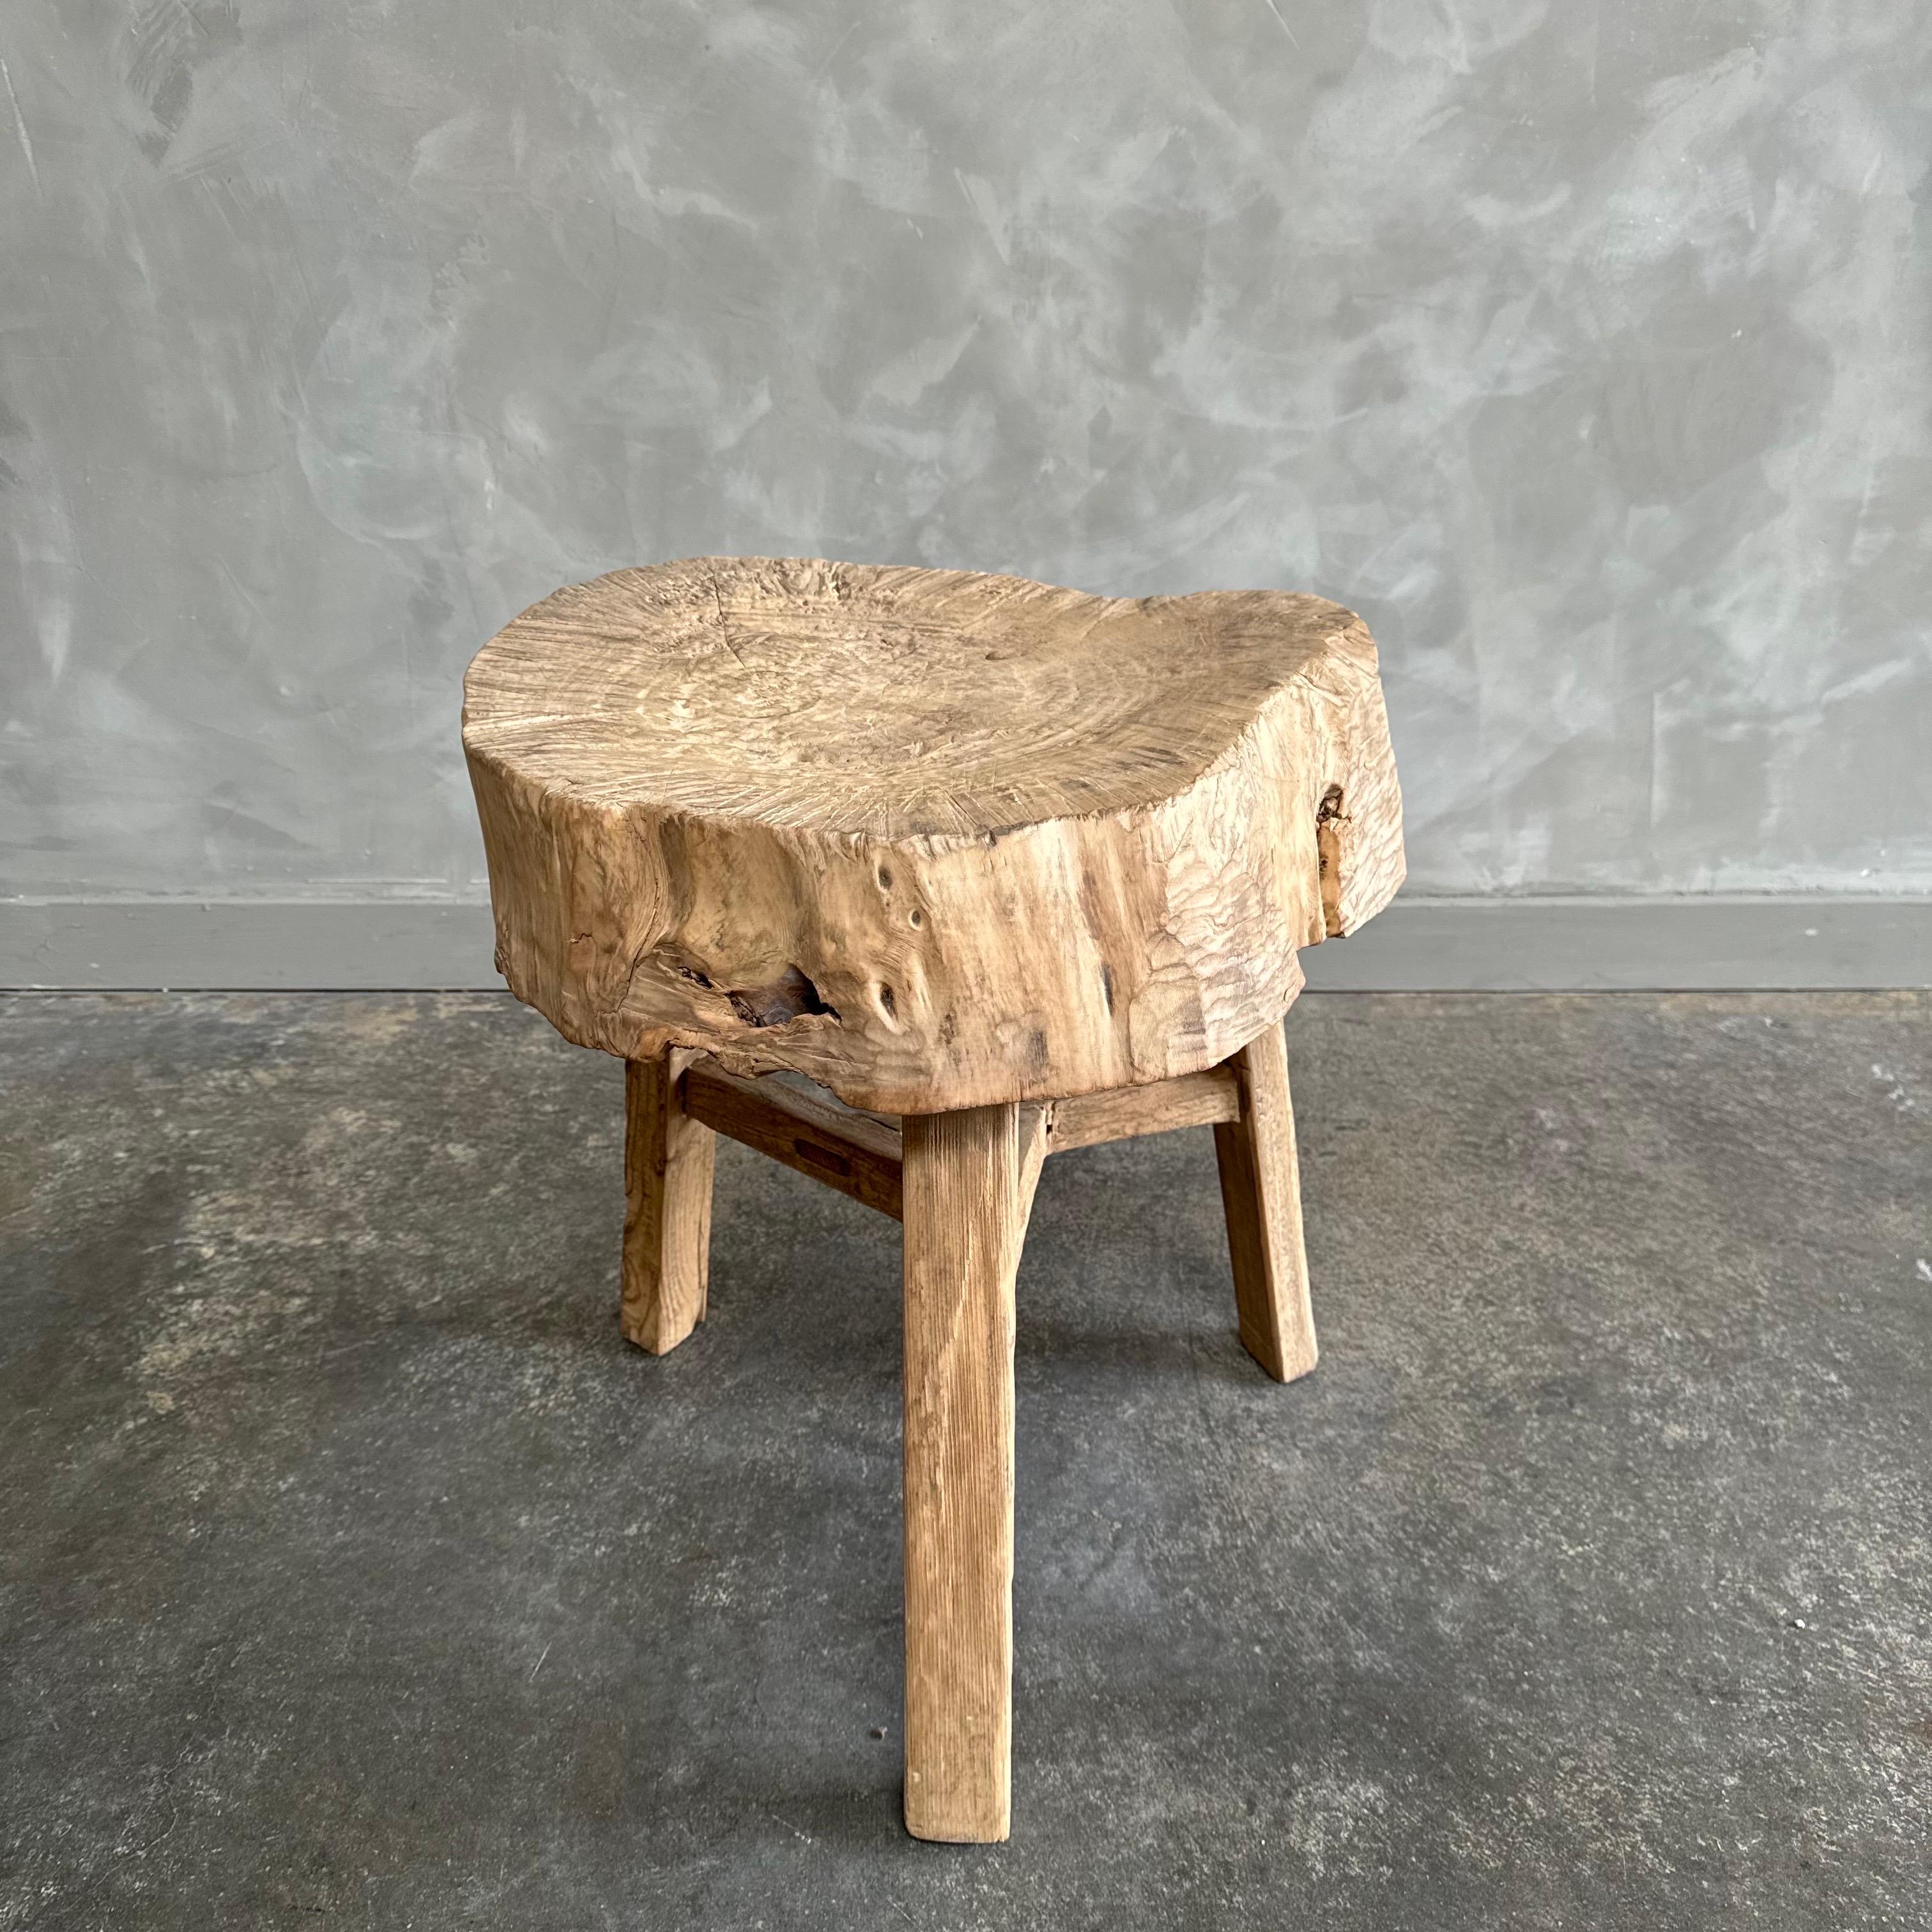 This solid stump slice was turned into a side table or stool. The solid thick top has a beautiful movement with unique characteristics. A natural live edge to show shape and form of what was. Solid and sturdy, perfect earthy organic piece to add to